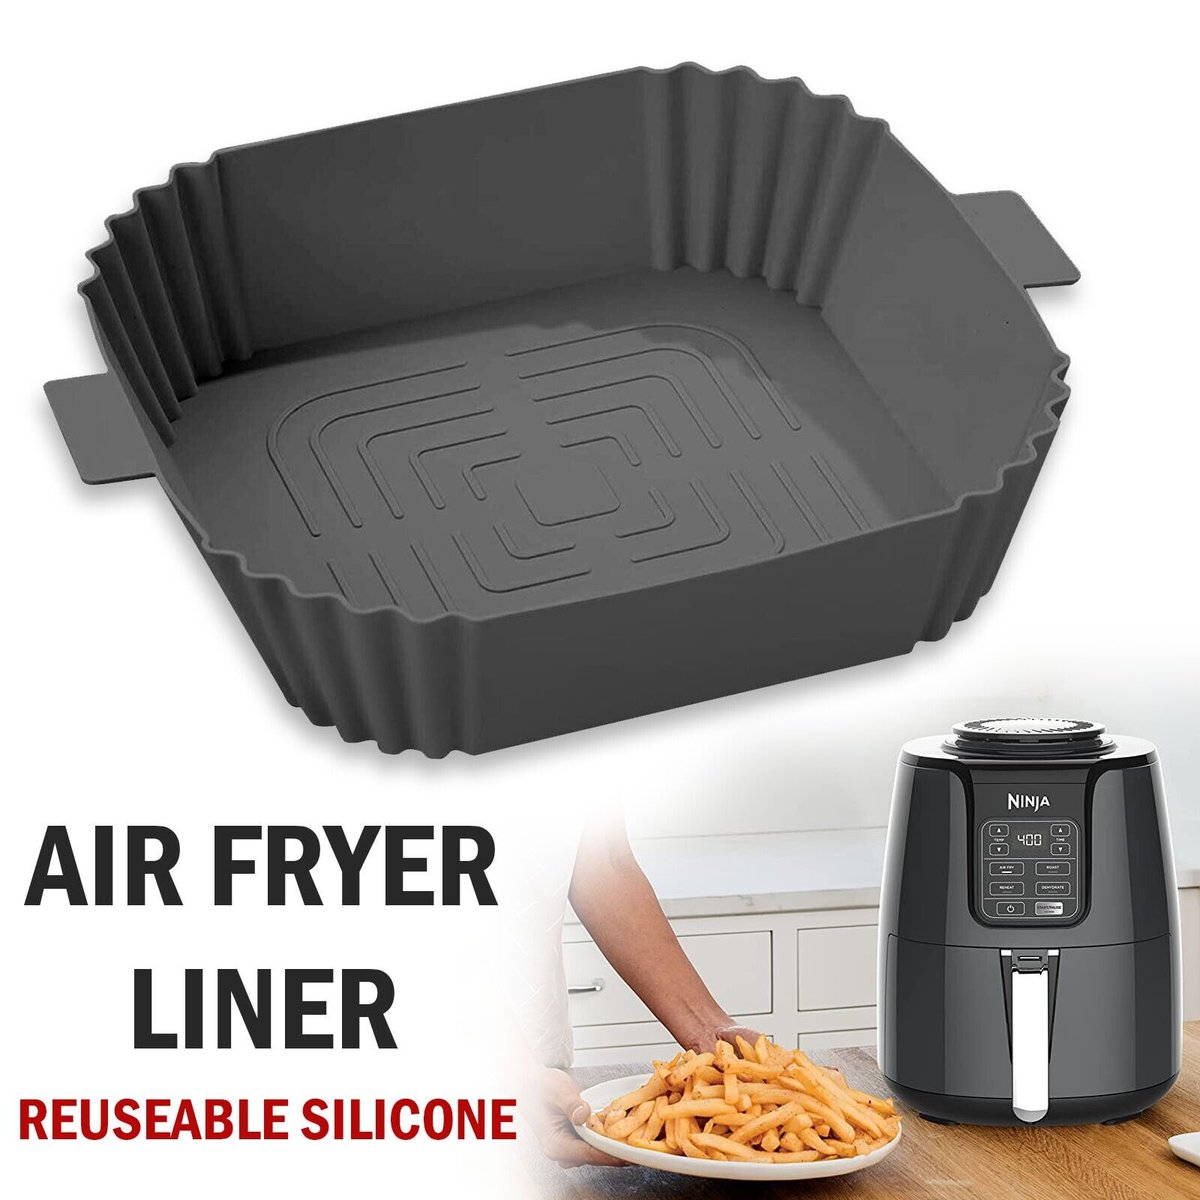 do you need an new air fryer pan for those french fries? check this one out at www.kitchen kitandkaboodle.com #kitchenware #kitchen #kitchendecor #tableware #cookware #kitchentools #kitchenutensils #kitchenappliances #dinnerware #knife #kitchenaccessories